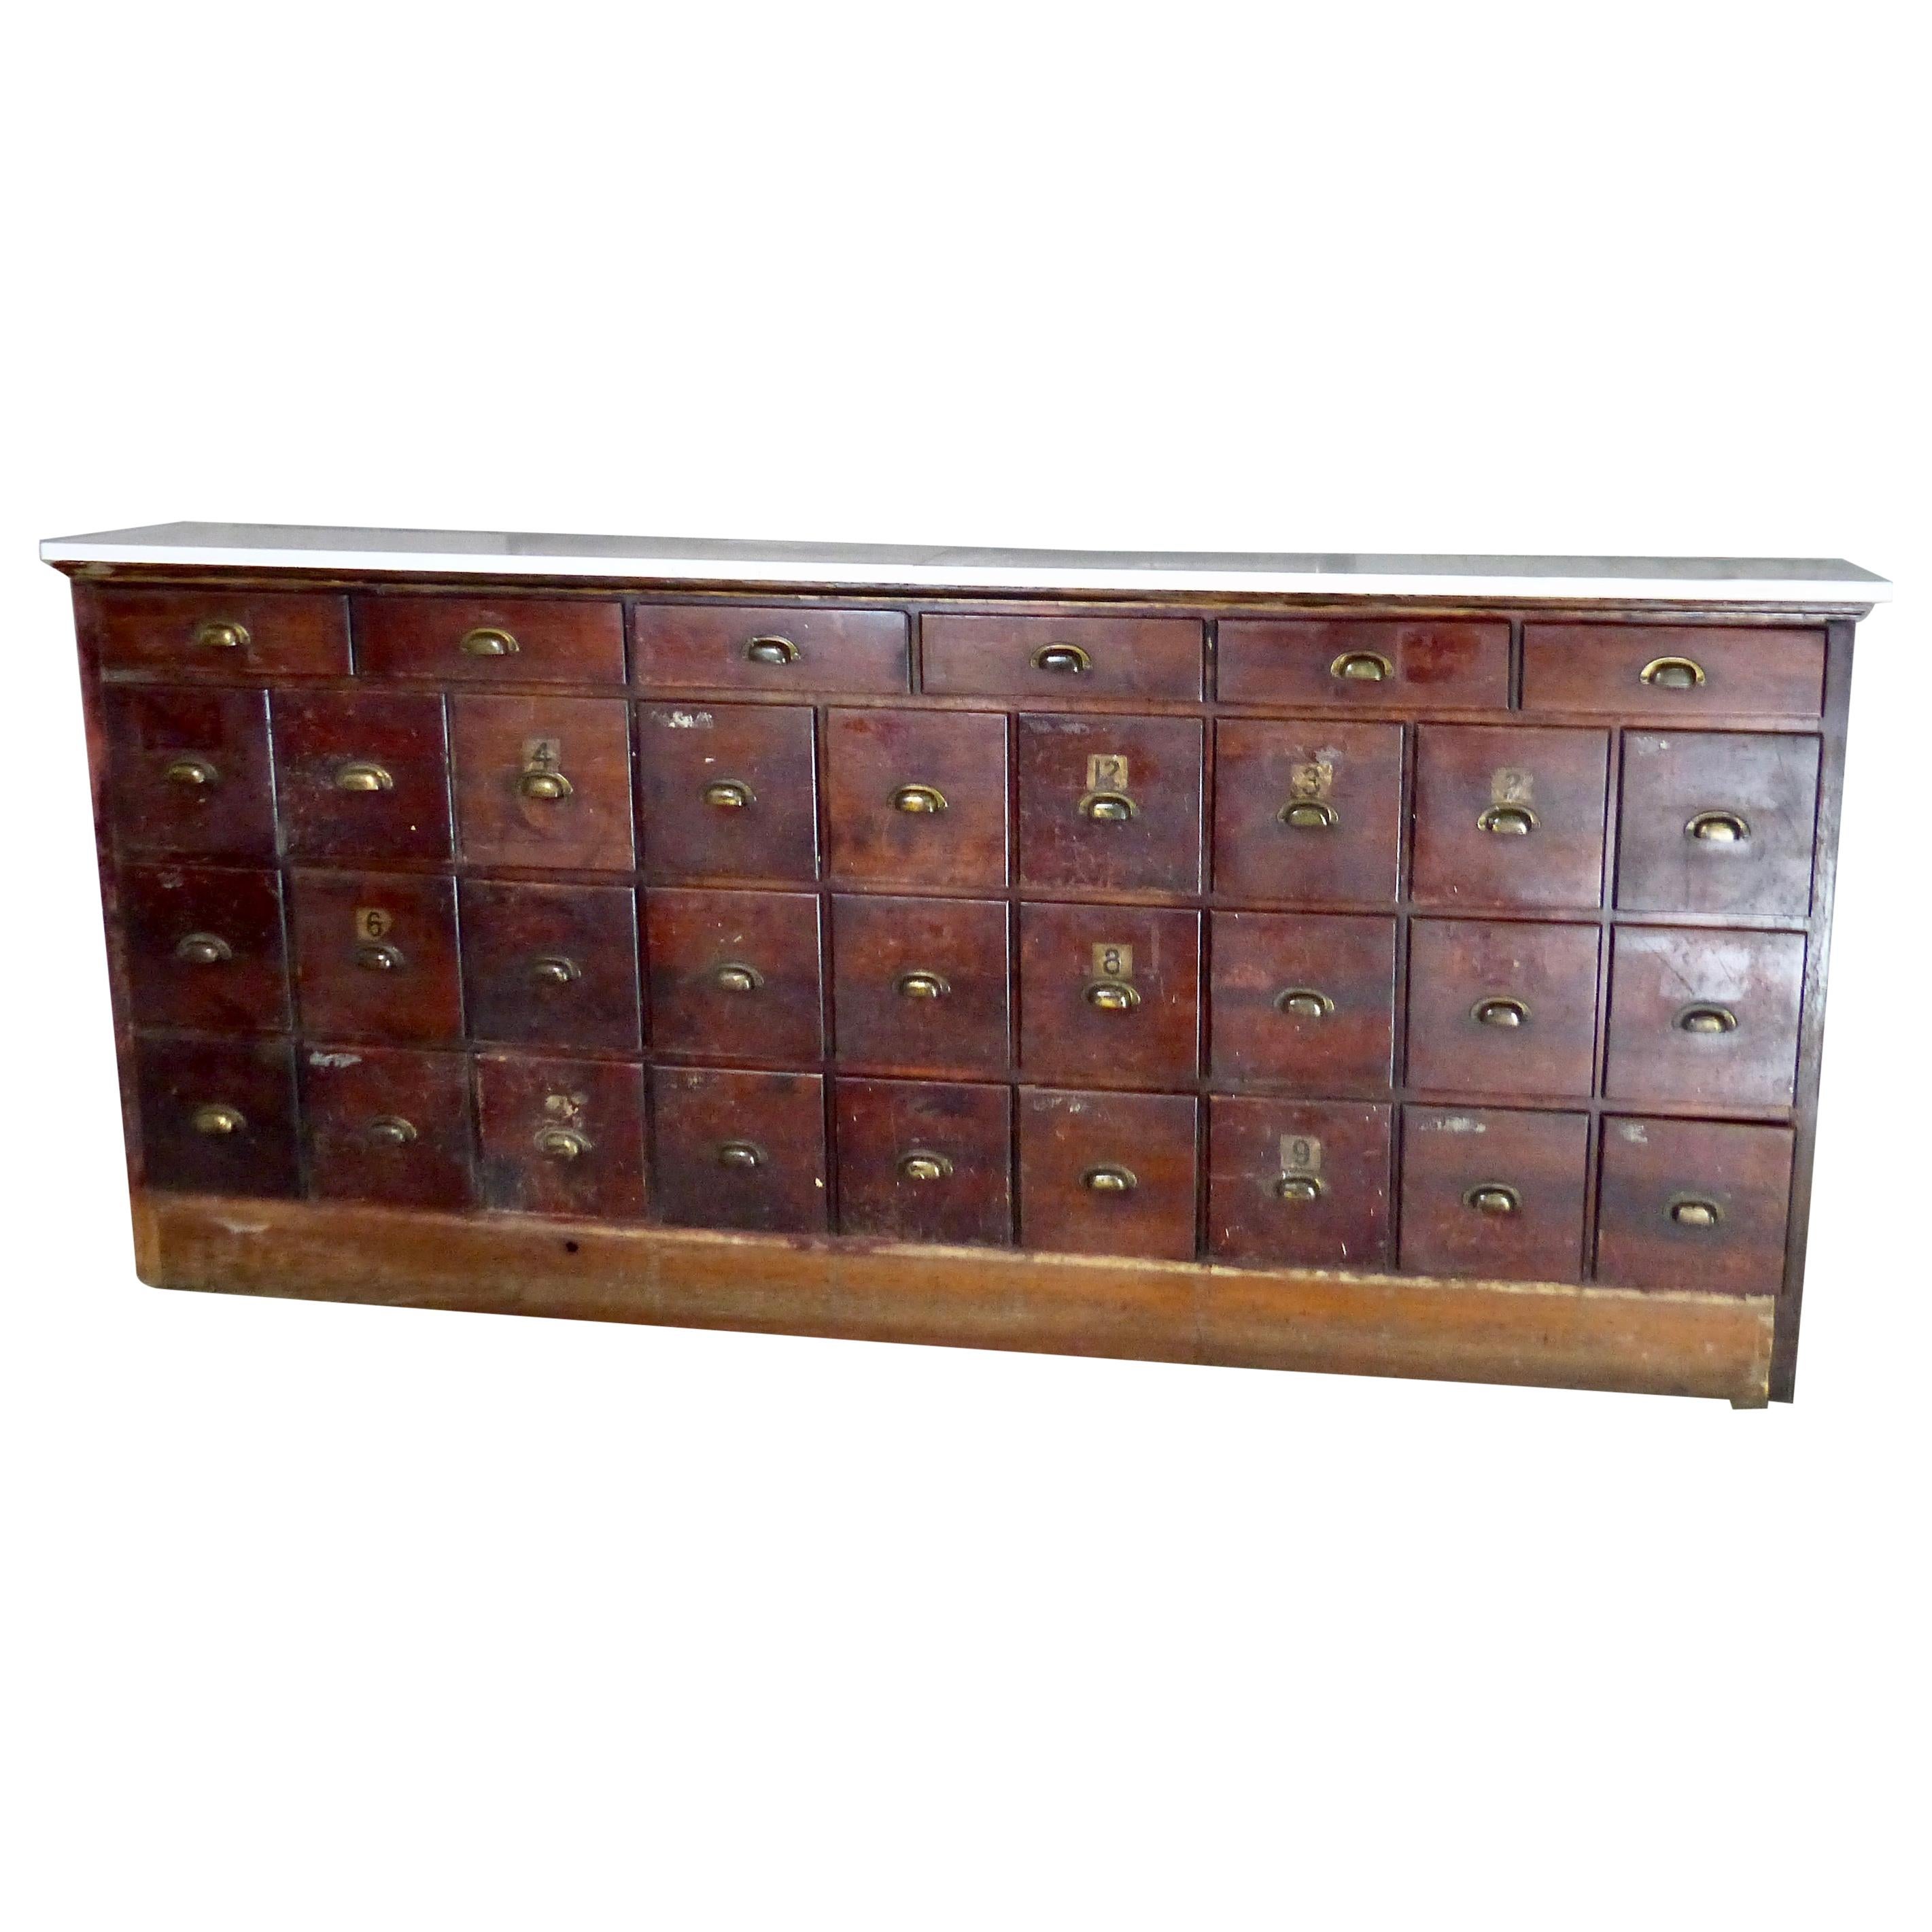 Wooden Multi Drawer Apothecary Cabinet, circa 1910